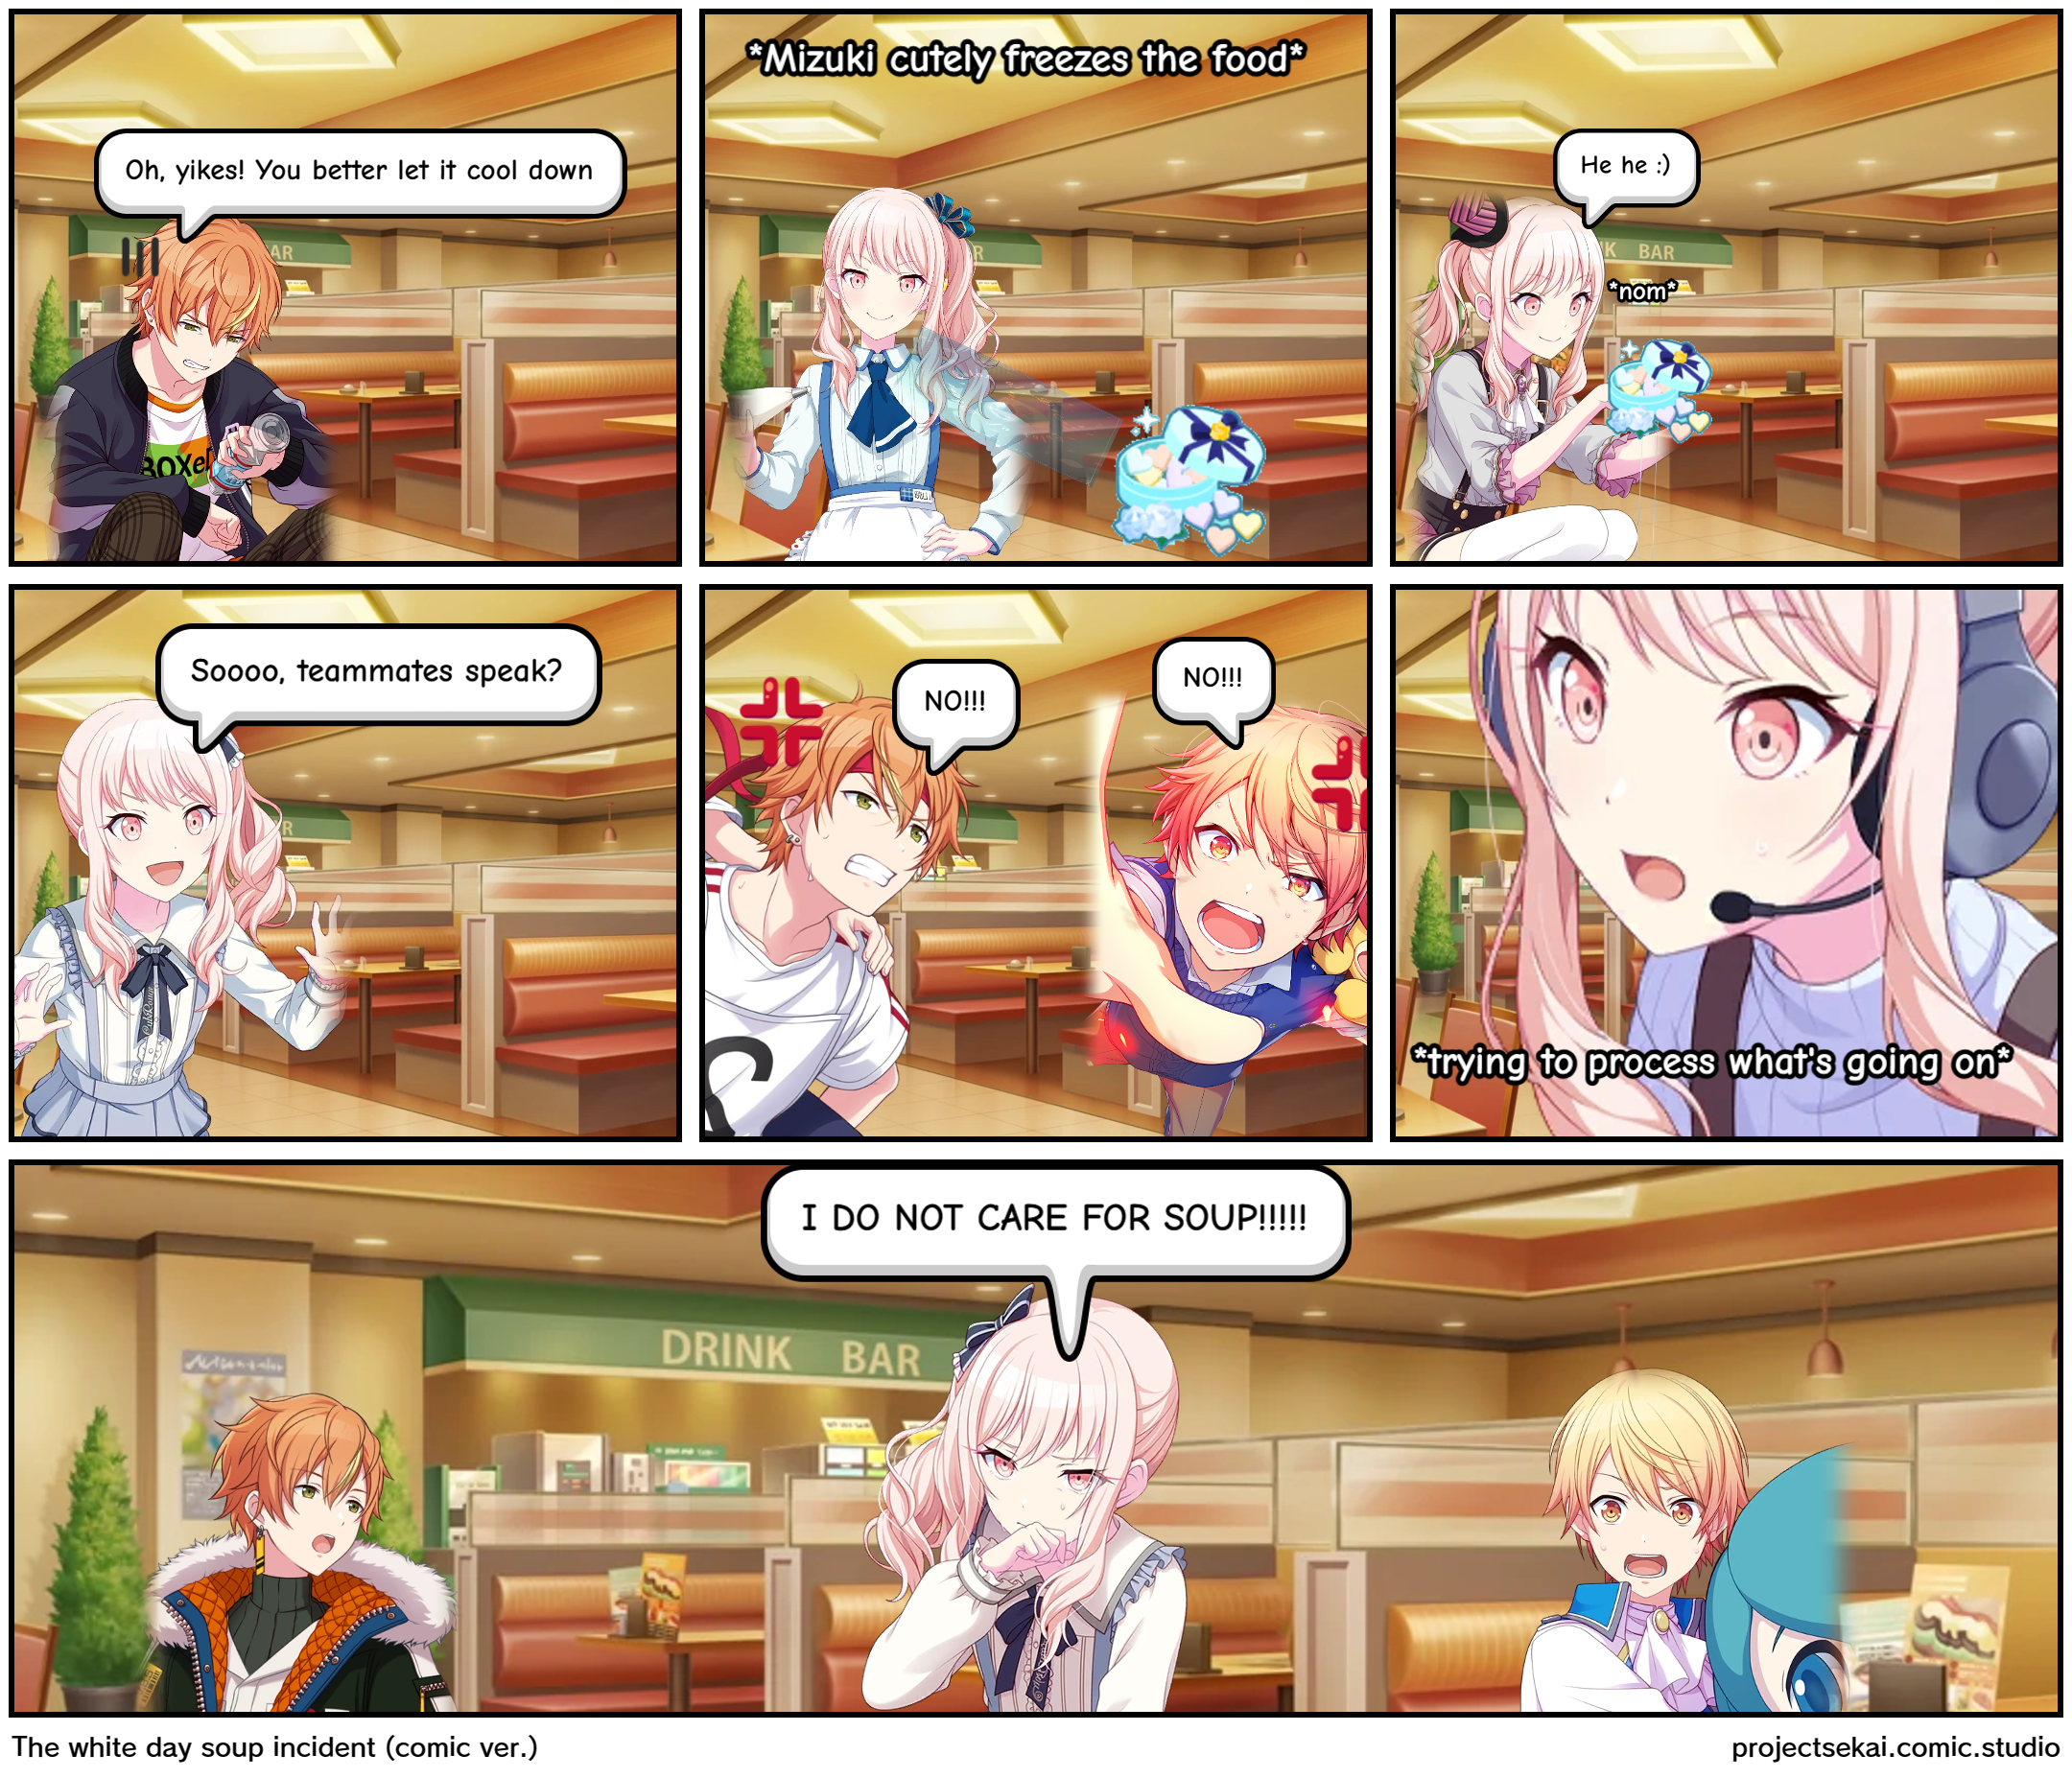 The white day soup incident (comic ver.)